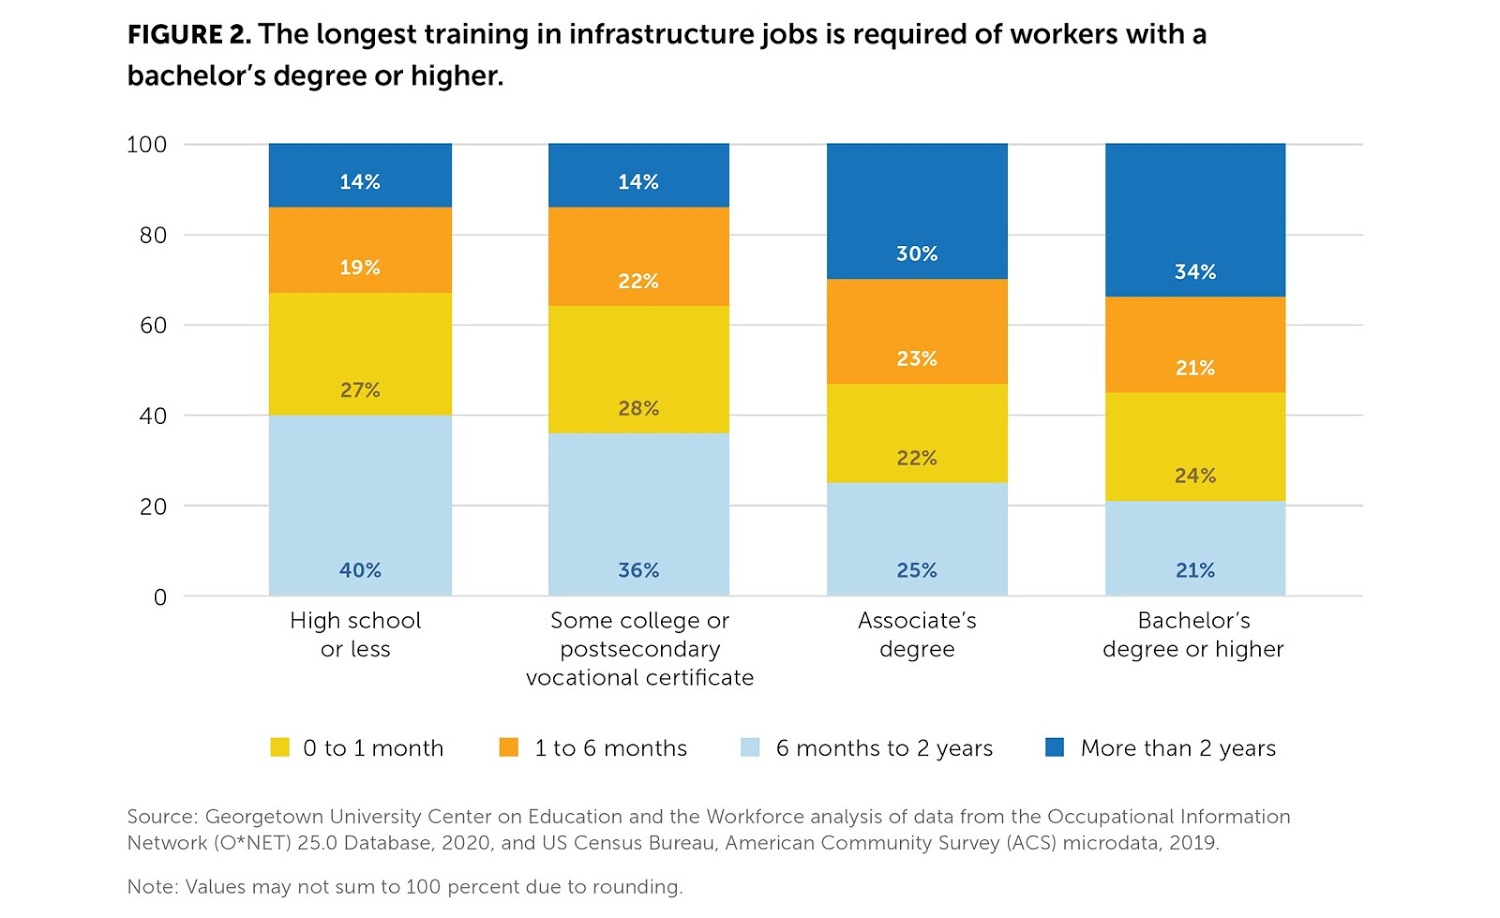 Infrastructure jobs will require different levels of training